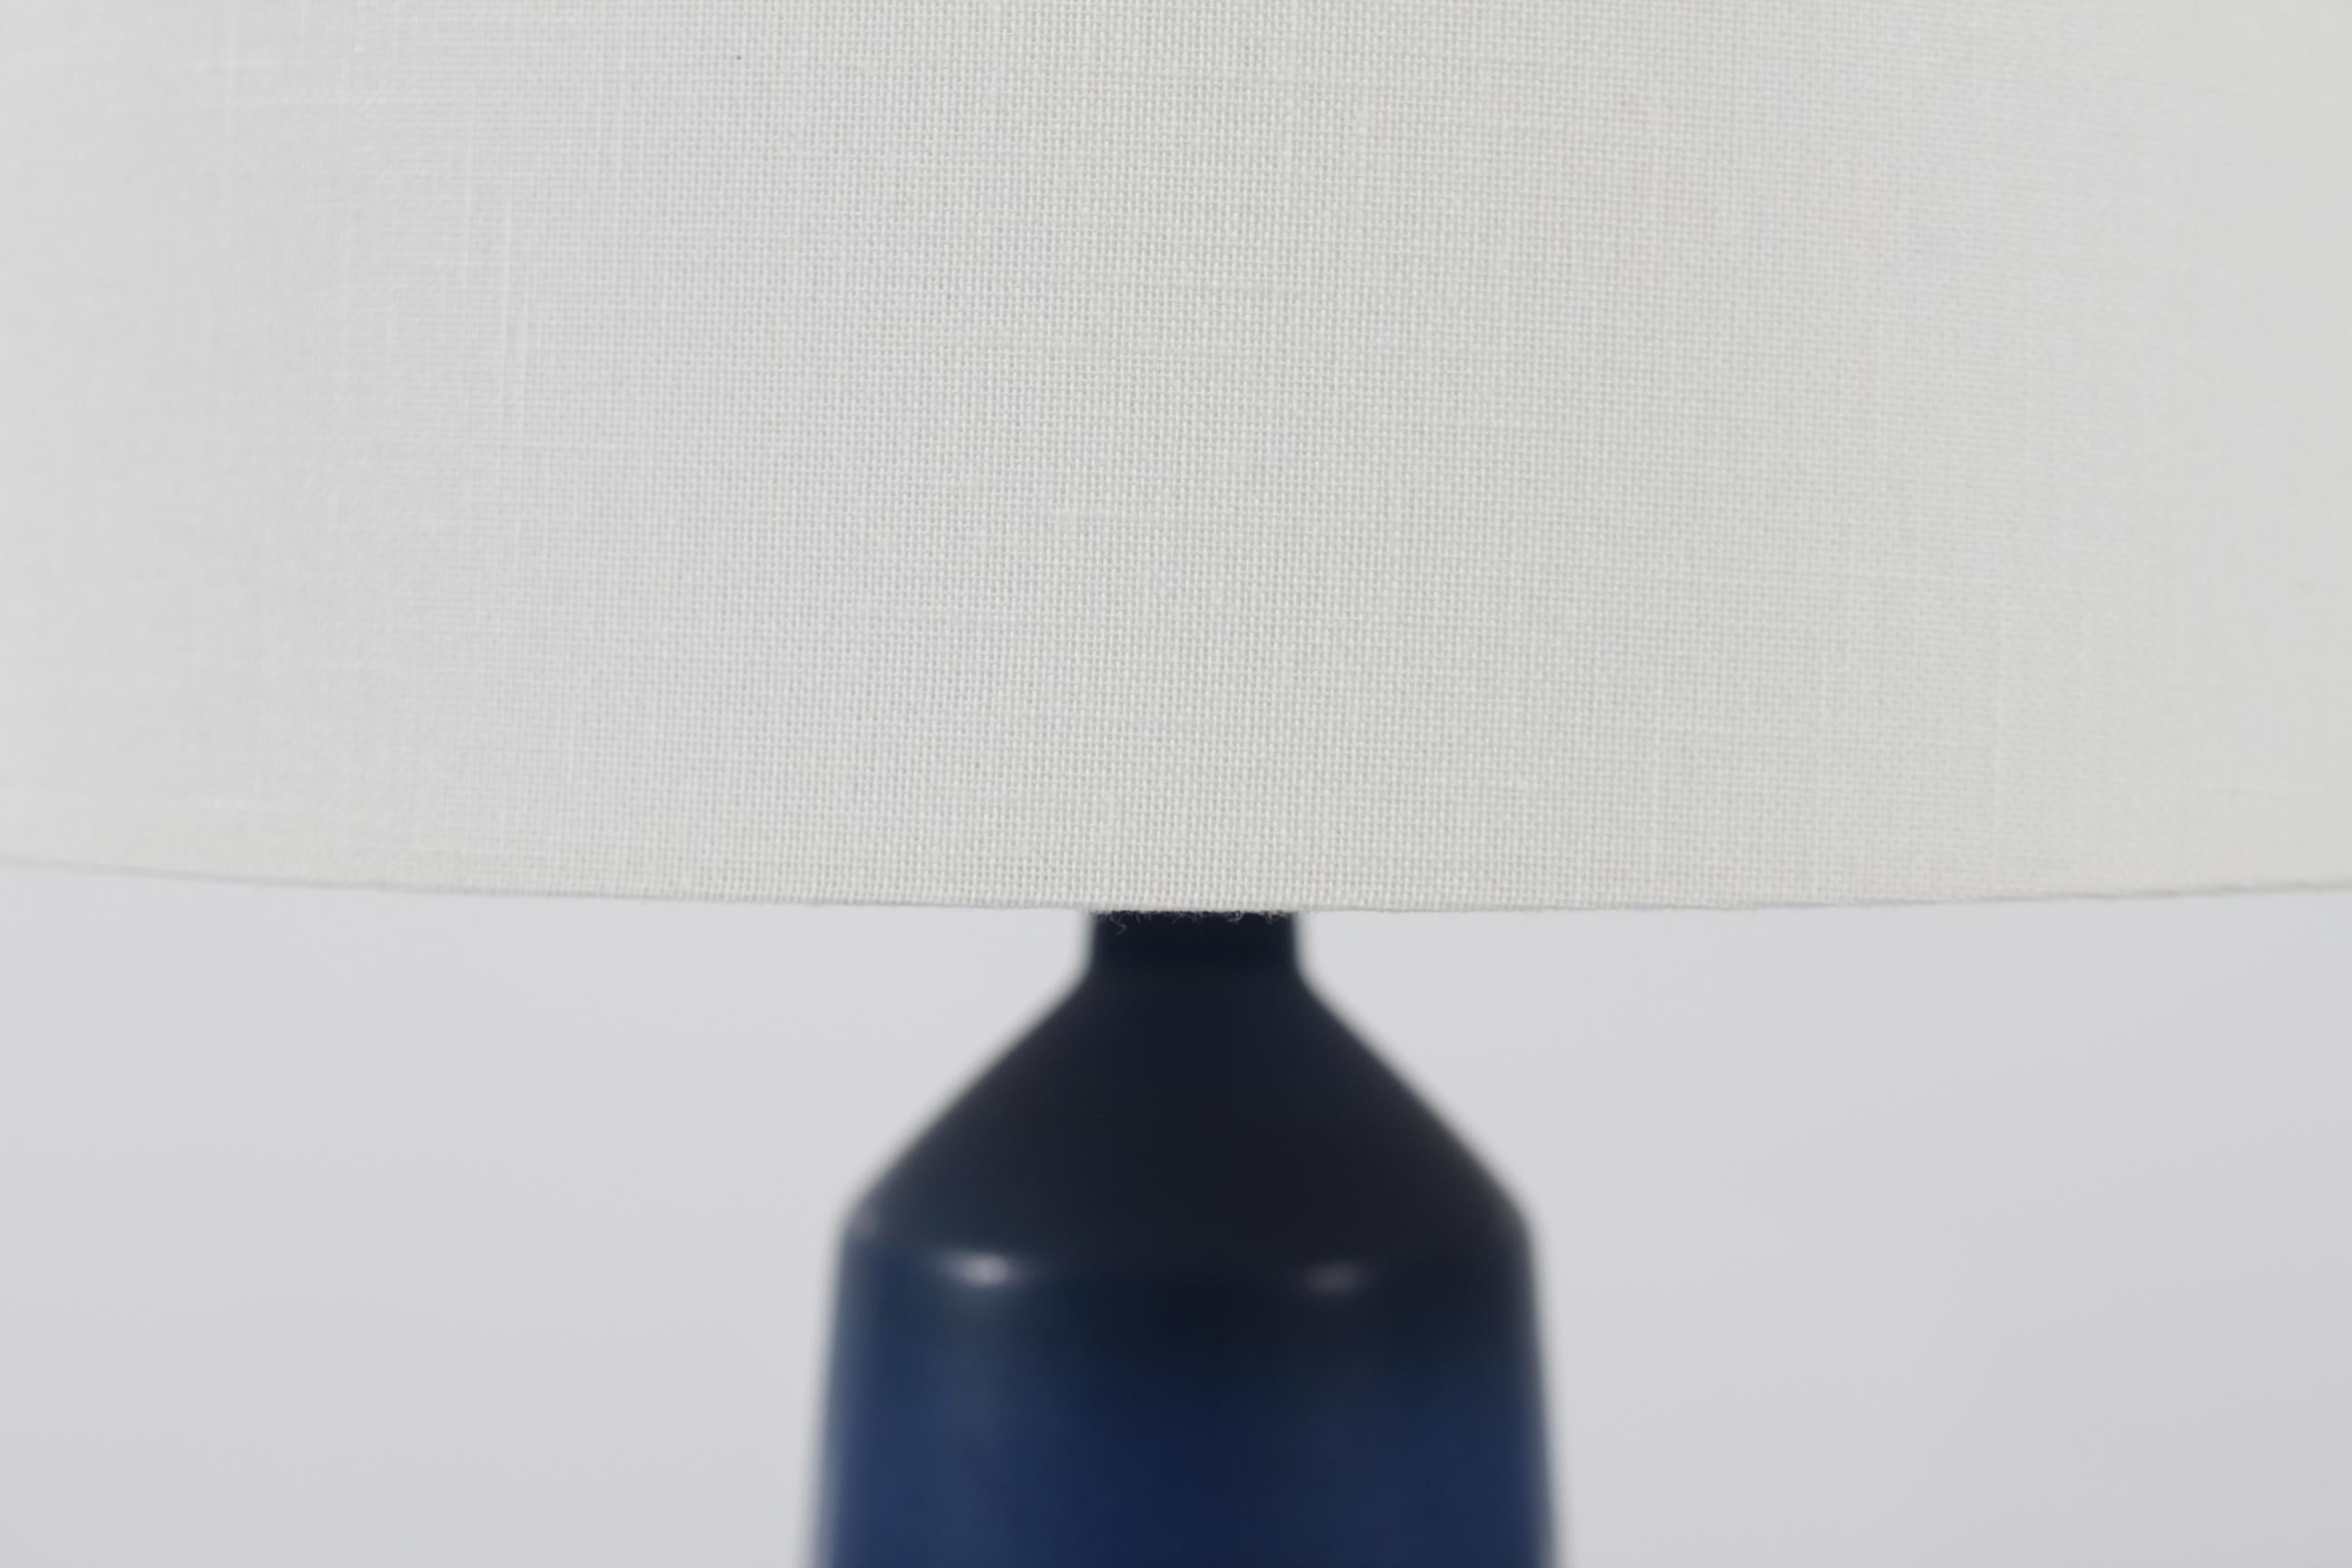 Tall slim Palshus table lamp with dark blue haresfur glaze designed by Per Linnemann-Schmidt.
A remarkable piece of Danish ceramic design.

Marked: Palshus + PLS for Per Linnemann-Schmidt + Denmark + DL13

Included is a new lampshade designed and